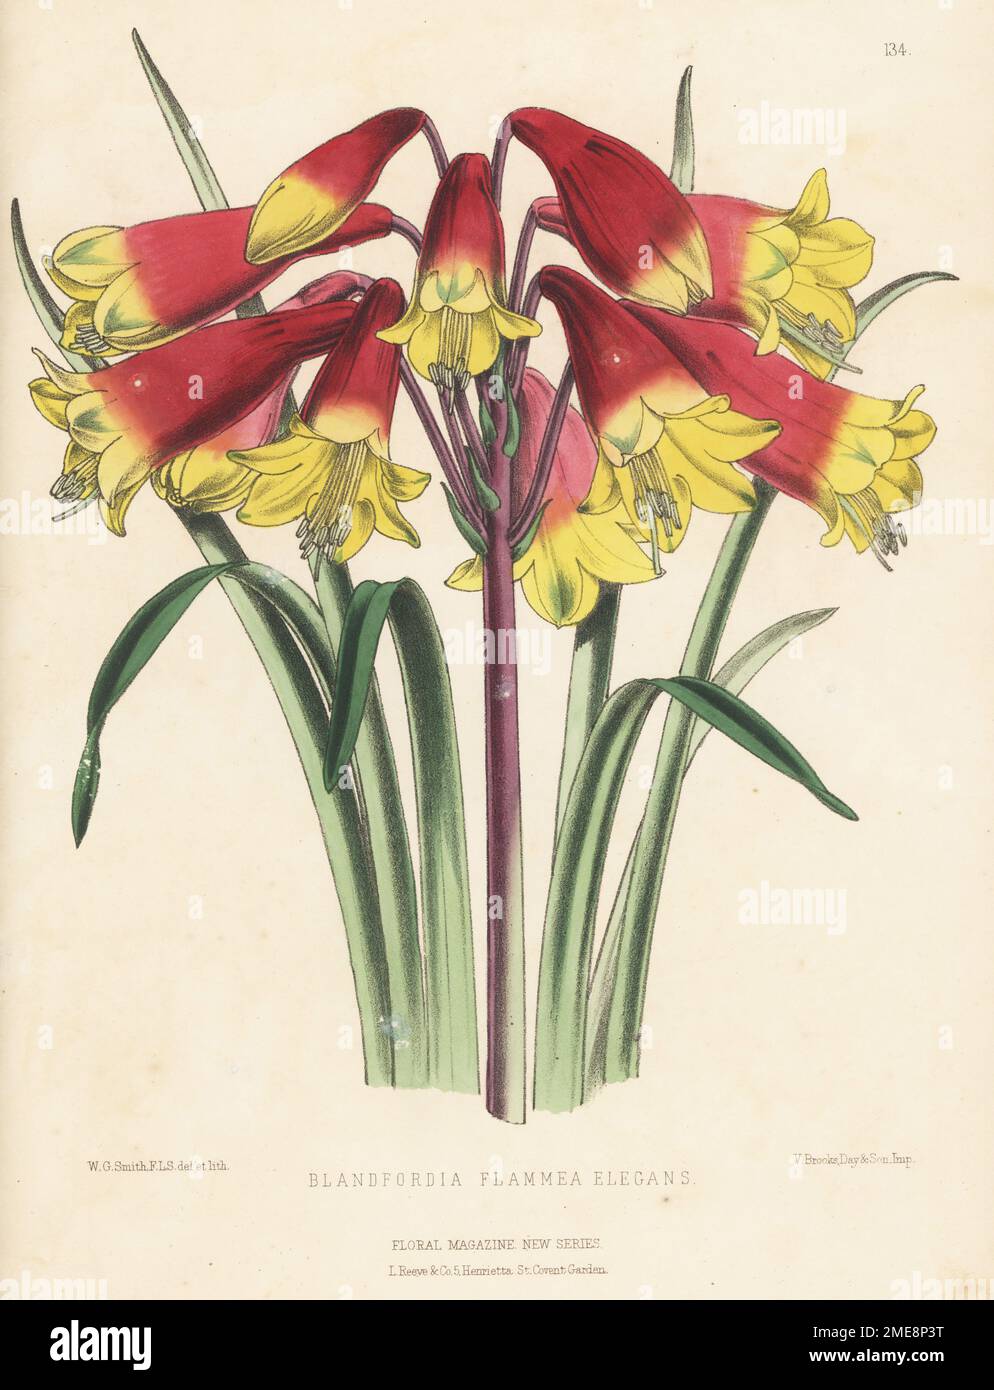 Christmas bells cultivar, Blandfordia grandiflora, native to eastern Australia. Hybrid of B. cunninghamii and B. flammea raised by Edward George Henderson and Son, Wellington Nurseries, St. John's Wood. As Blandfordia flammea-elegans. Handcolored botanical illustration drawn and lithographed by Worthington George Smith from Henry Honywood Dombrain's Floral Magazine, New Series, Volume 3, L. Reeve, London, 1874. Lithograph printed by Vincent Brooks, Day & Son. Stock Photo